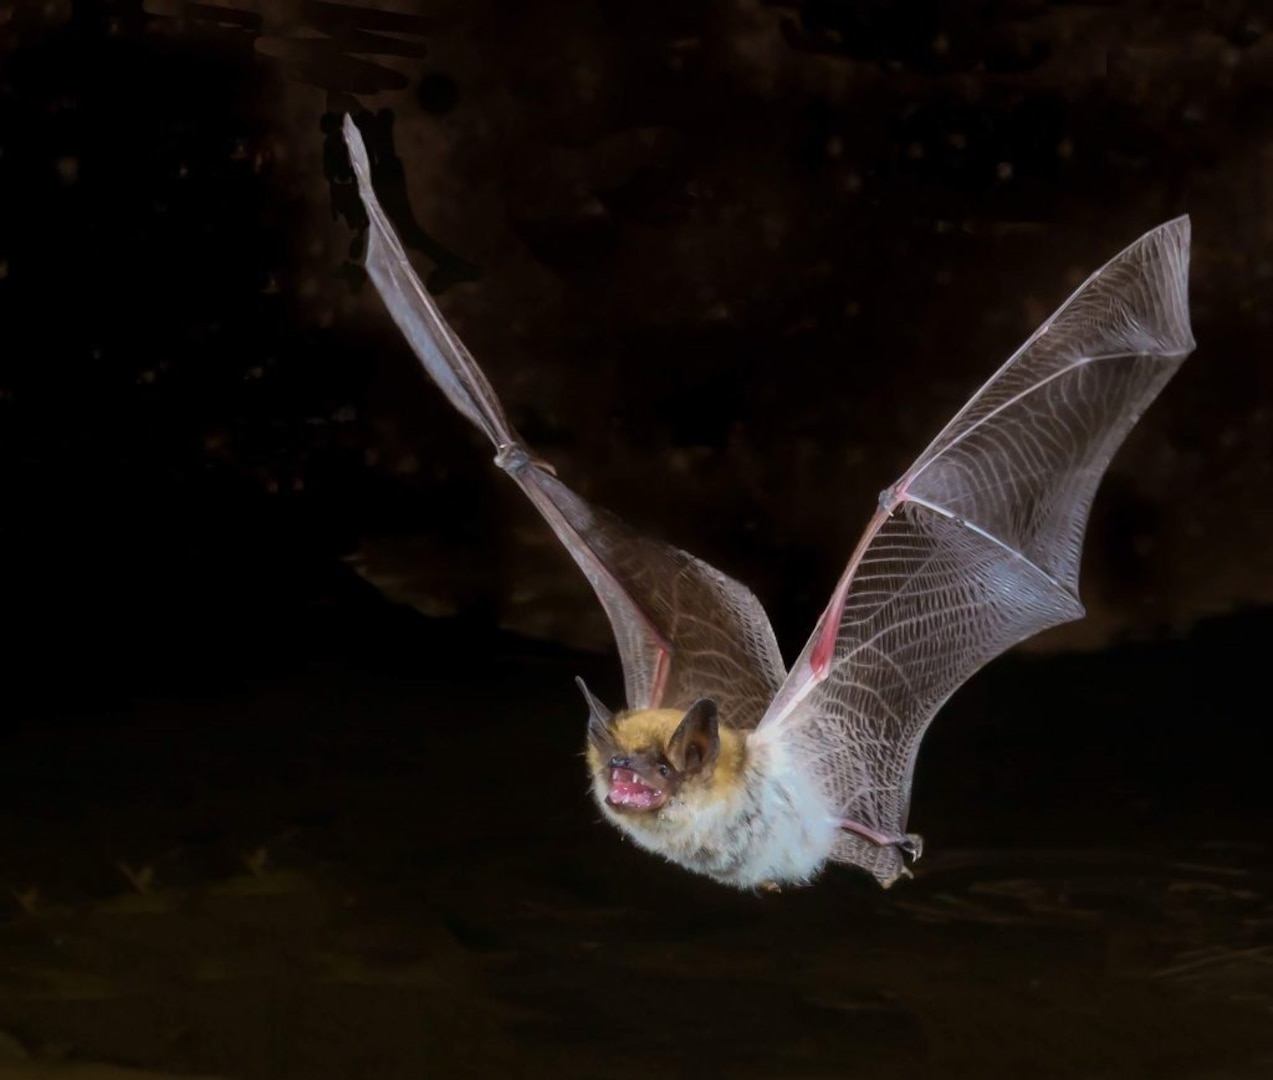 JBSA health officials urge people to be cautious around bats